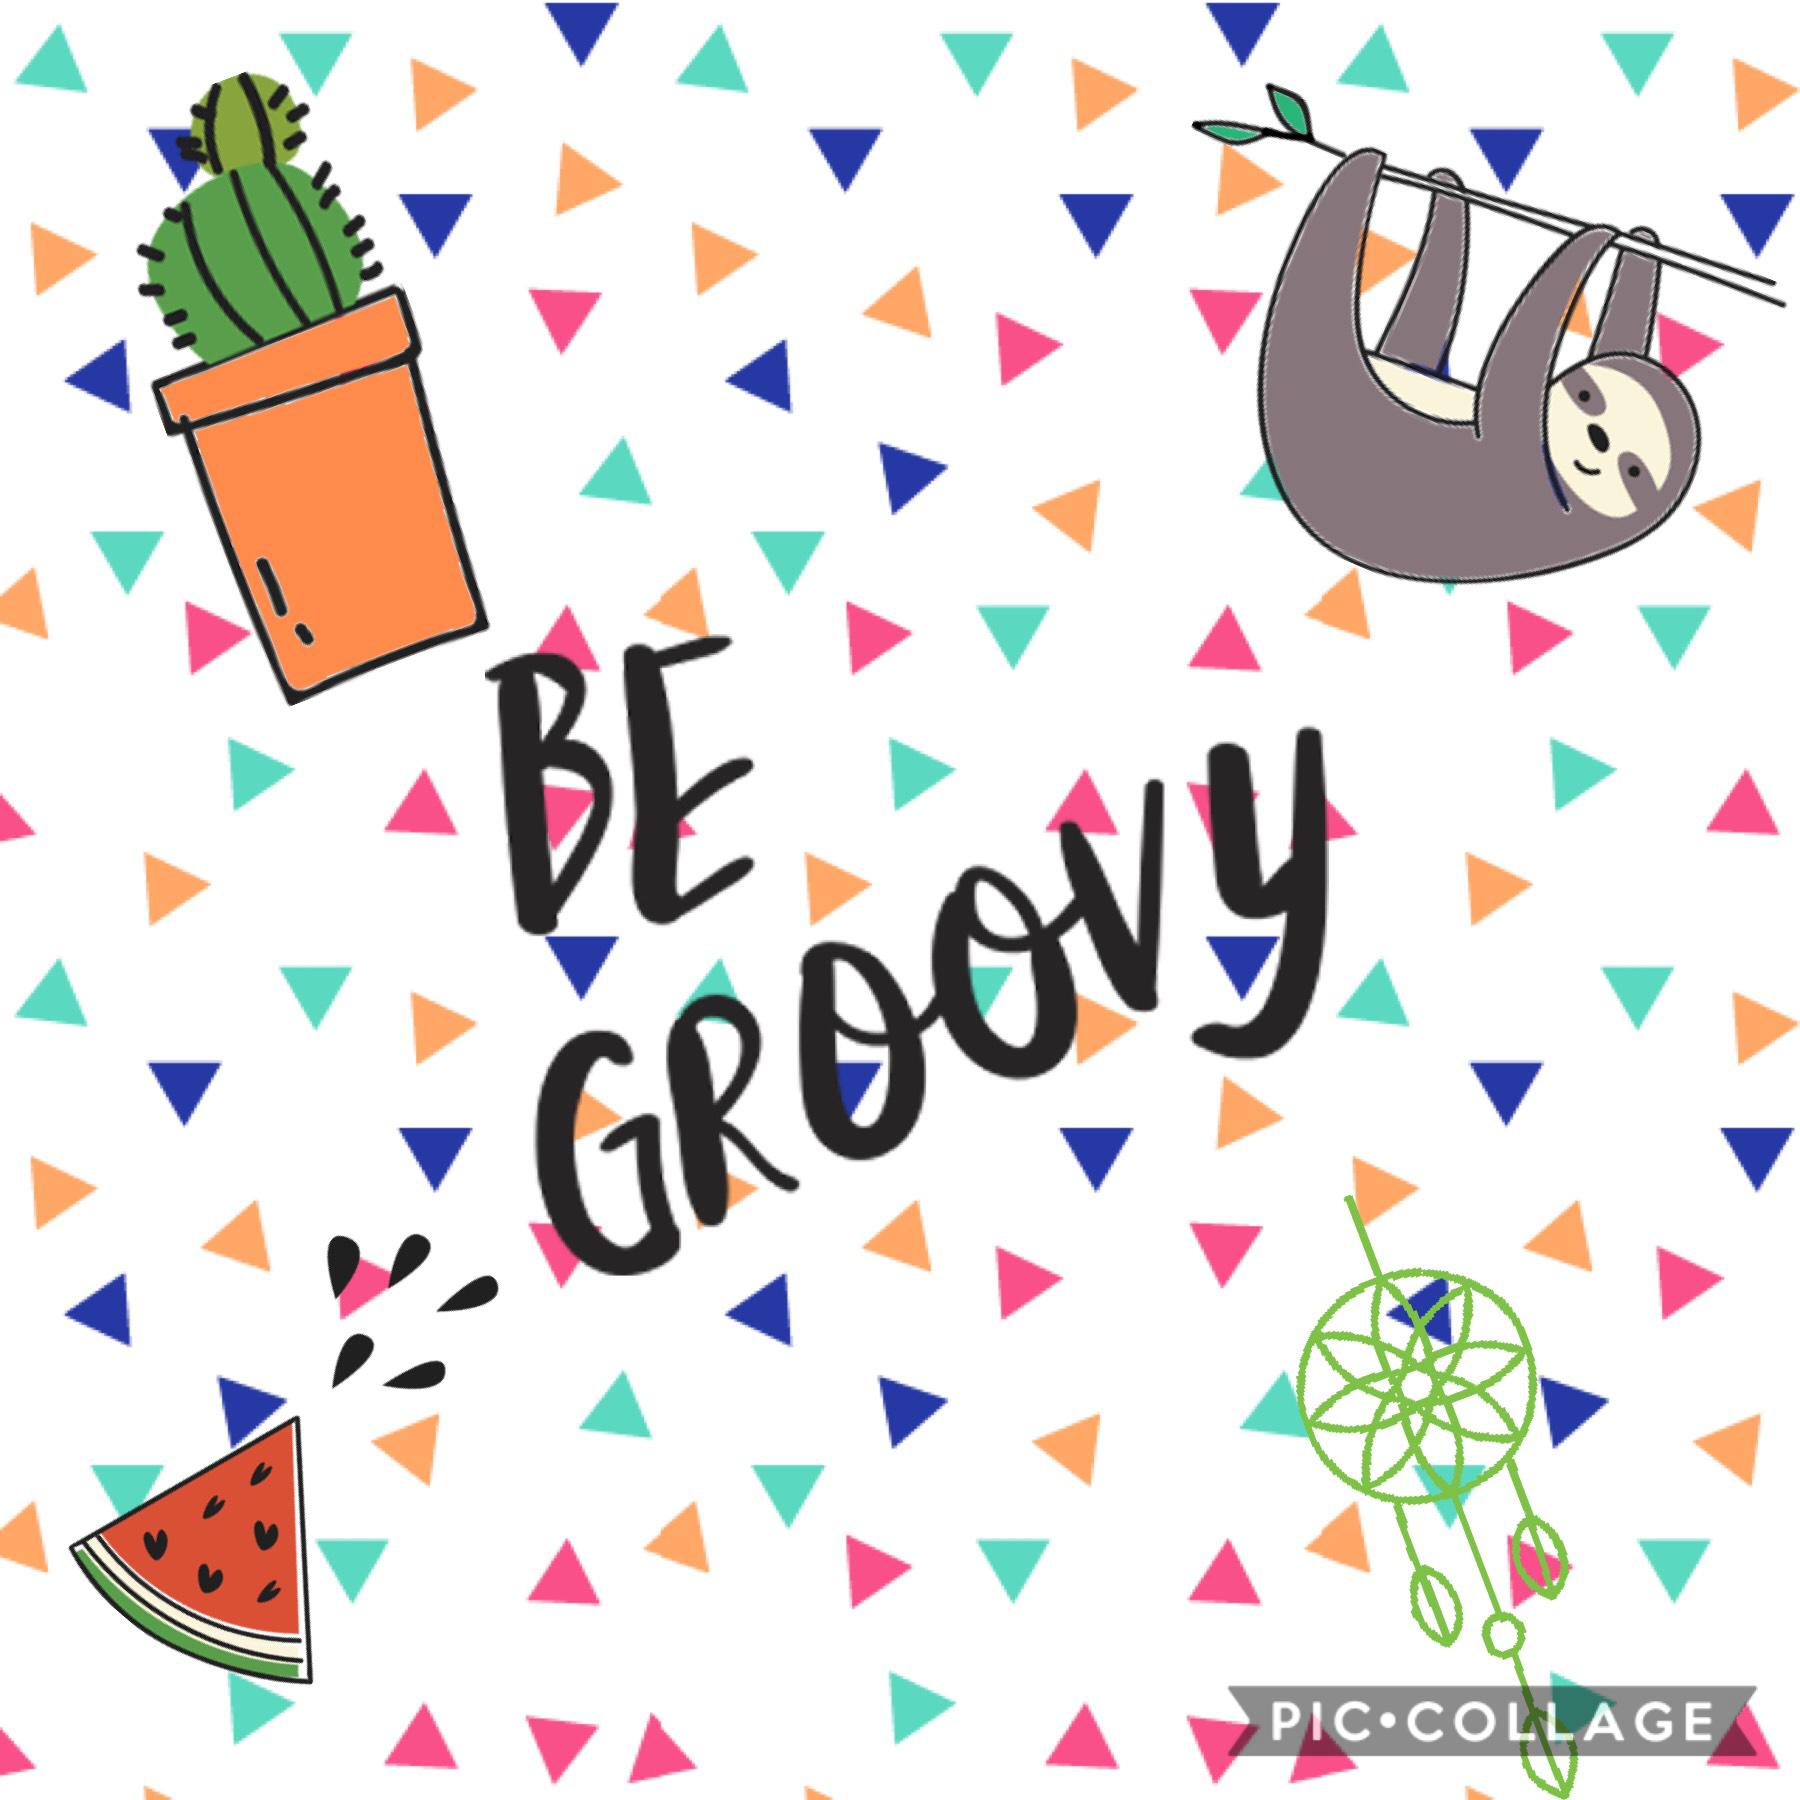 Be groovy 

If you are excited for school comment yay school and if you aren’t say no school 

I know I want to start school so it can be over again hahah 